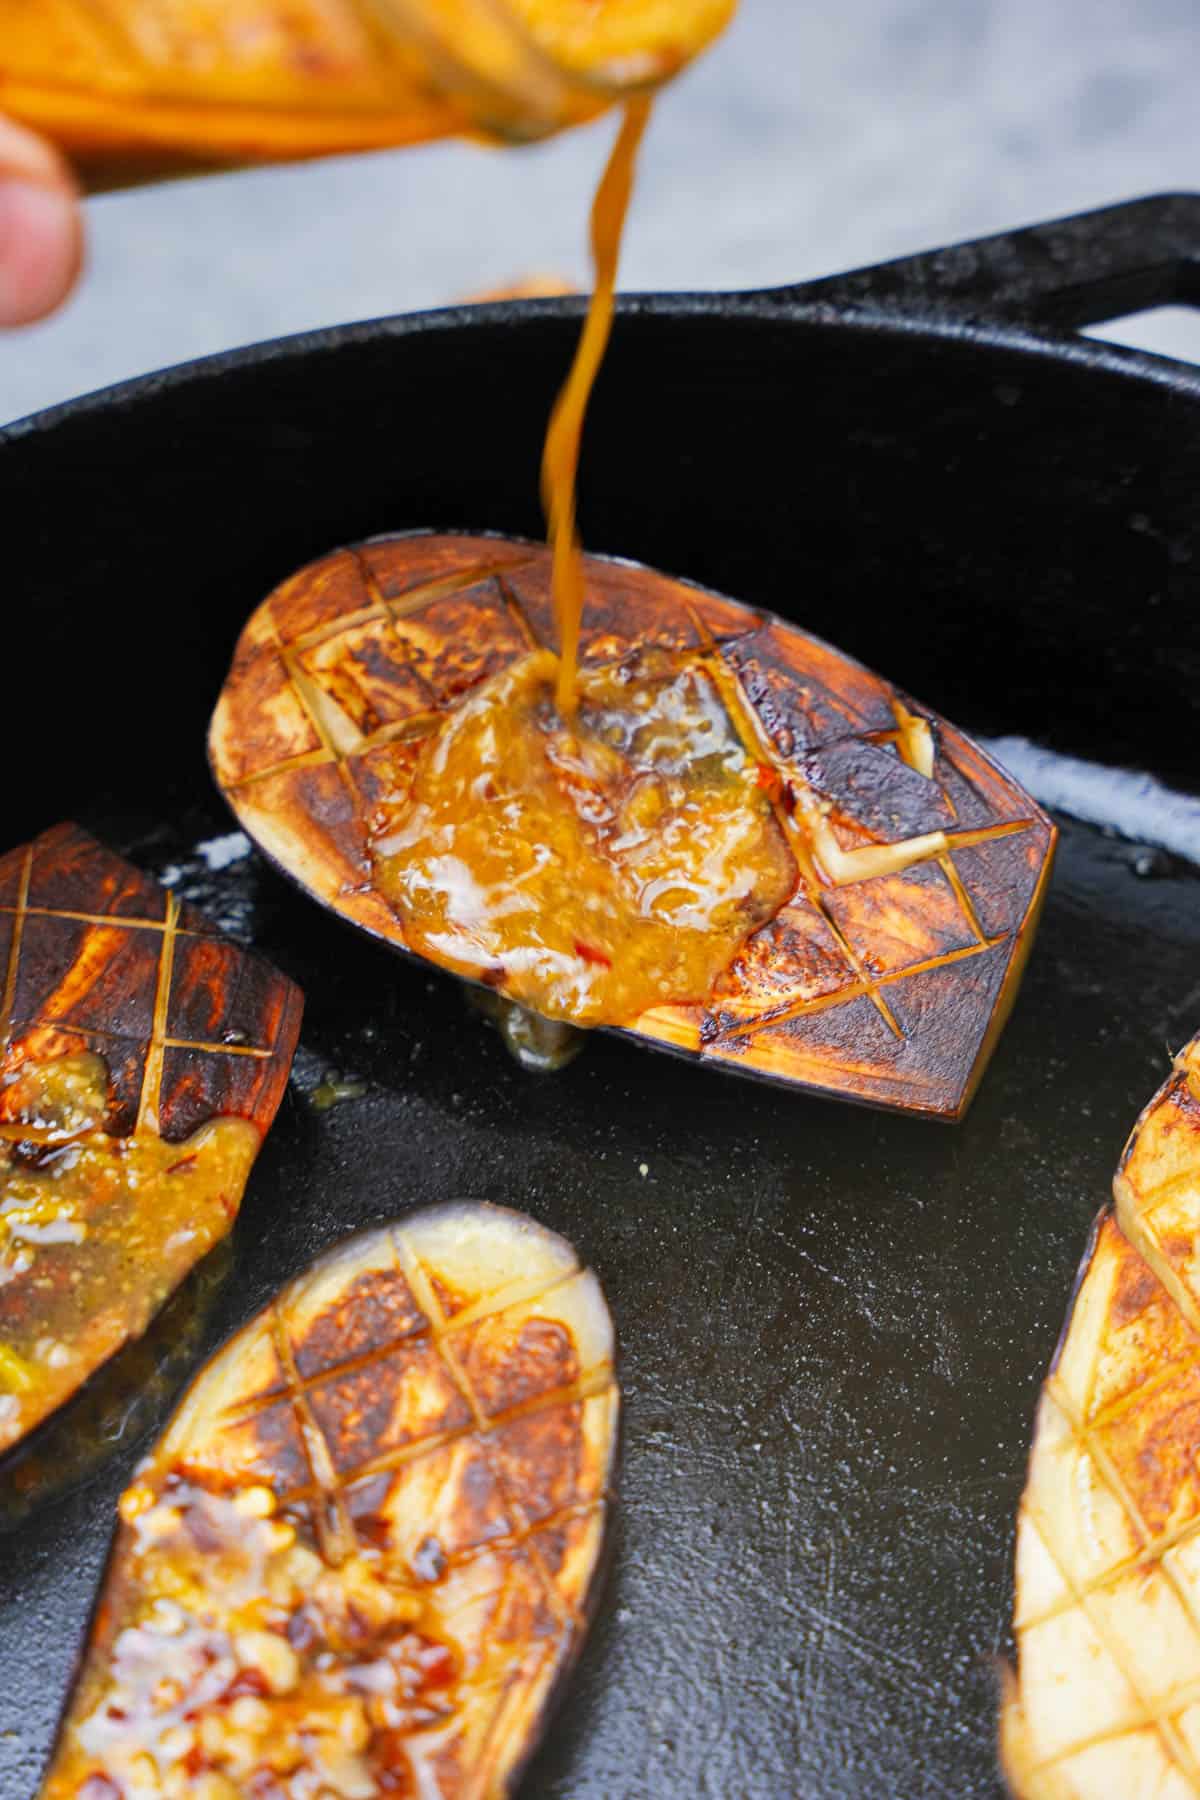 Miso glazed is poured onto seared eggplant in a cast iron skillet.